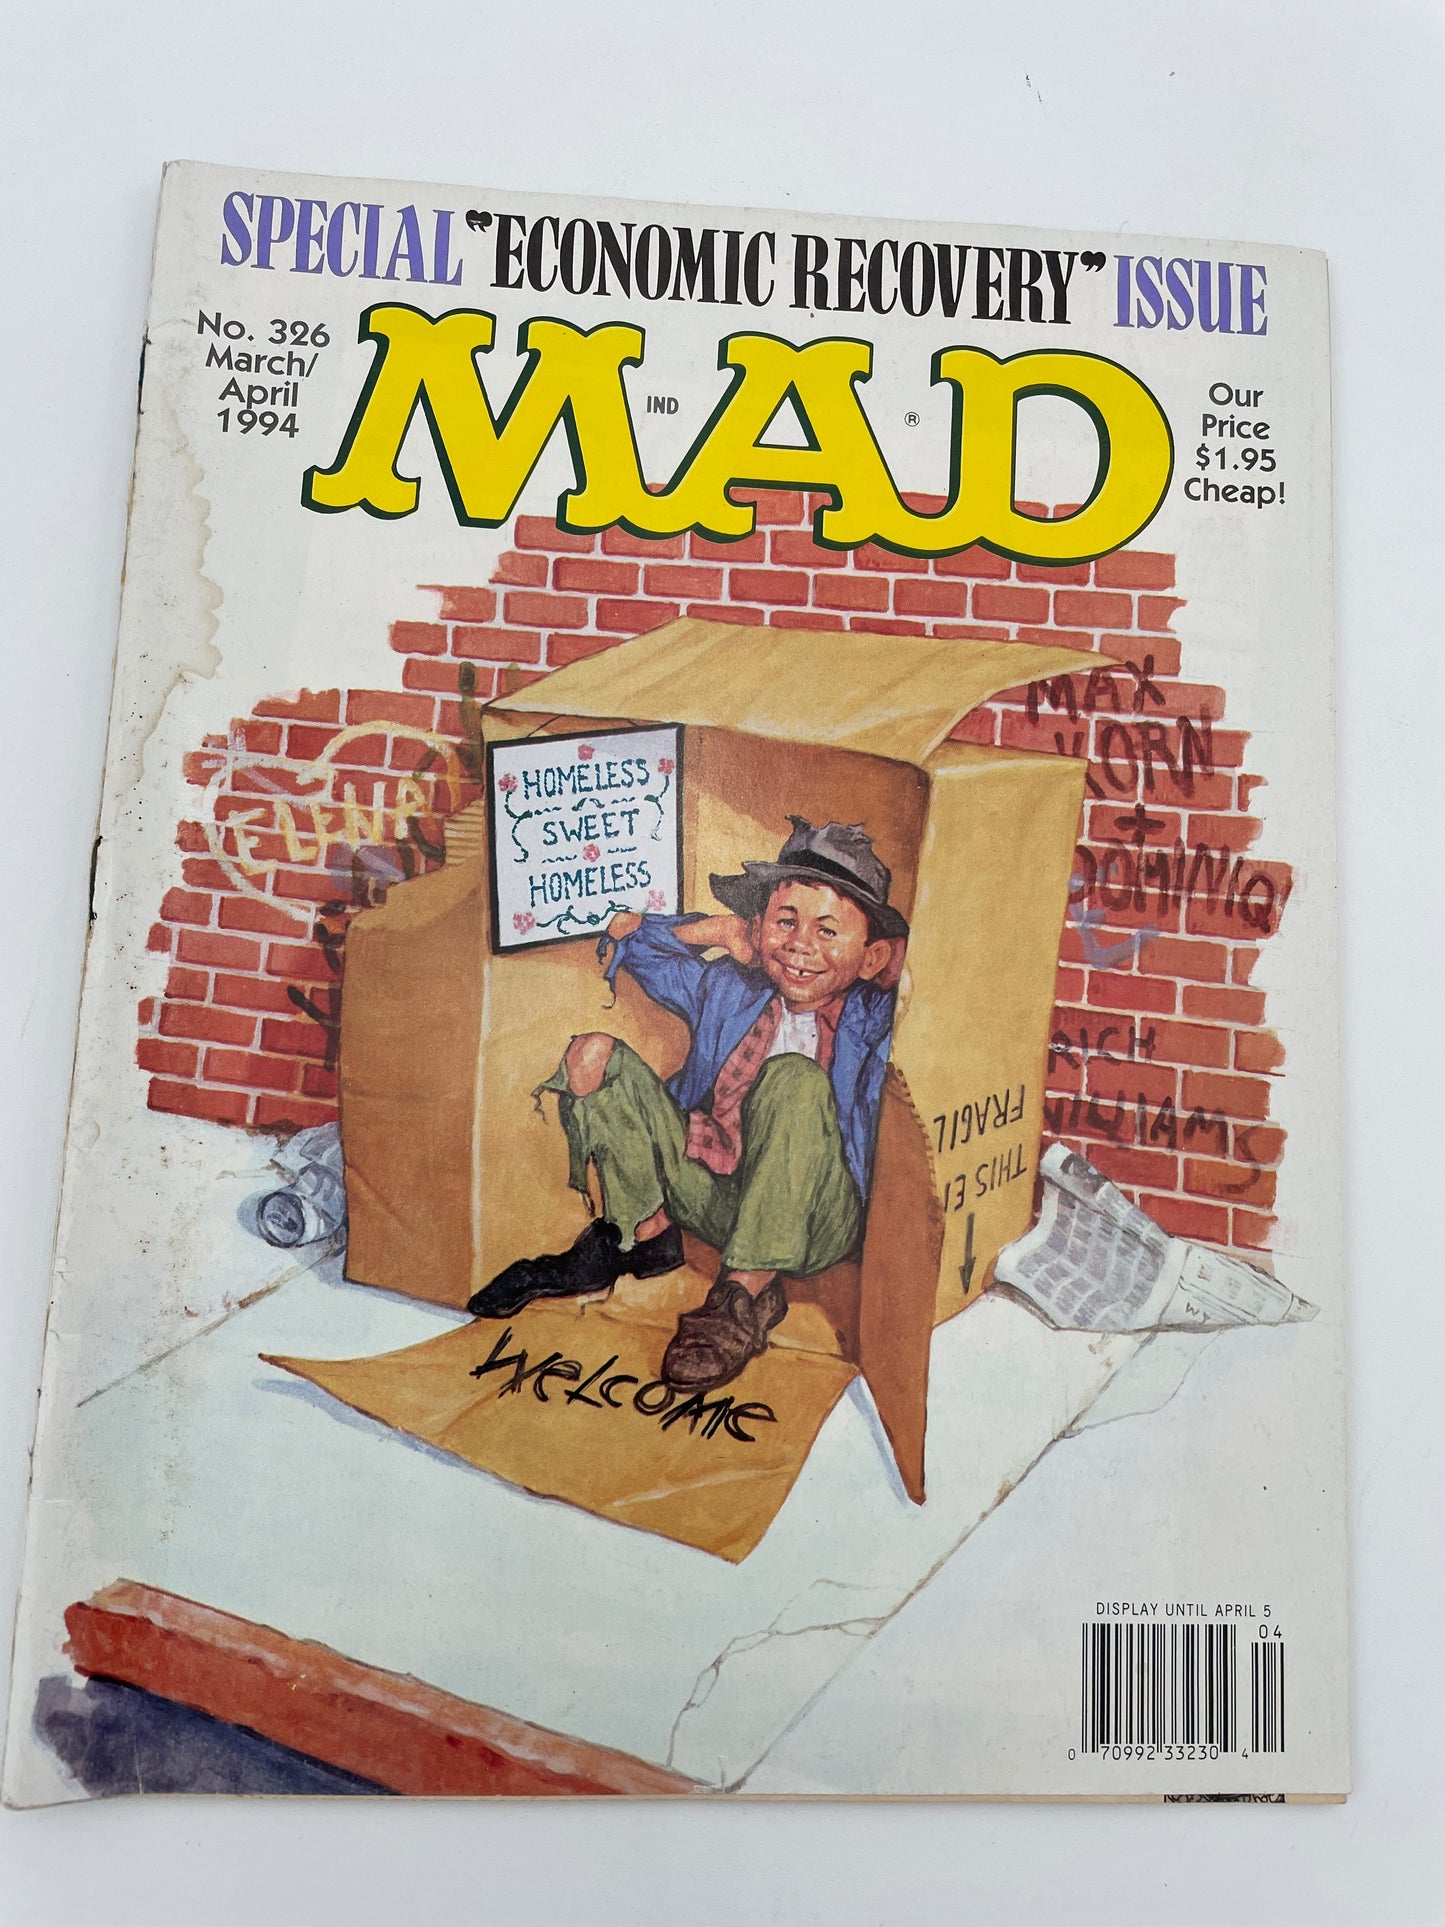 Mad Magazine - Homeless #326 - March/April 1994 #101531